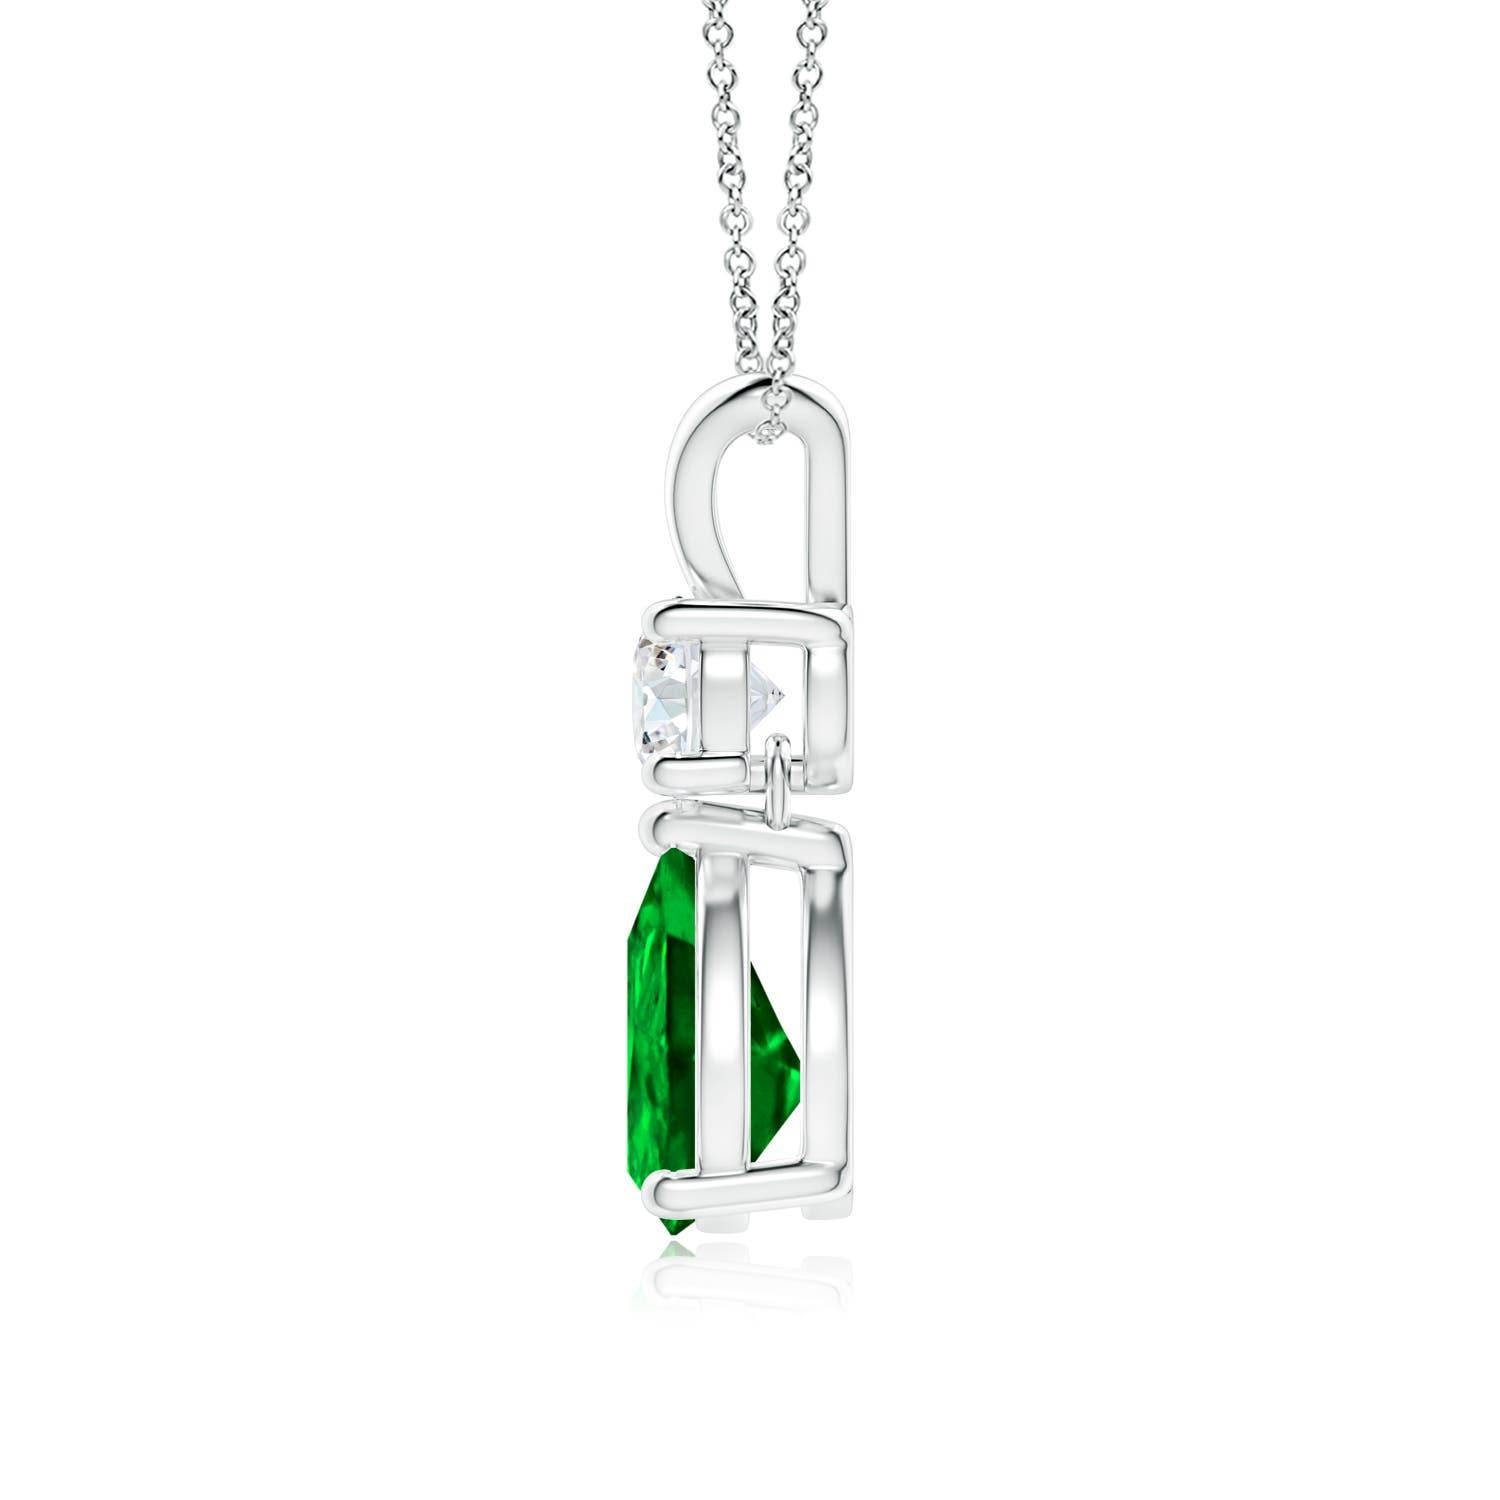 A vivid green pear cut emerald dangles from a sparkling white diamond on this elegant drop pendant. The lustrous V bale adds beauty to this 14k white gold emerald and diamond pendant. It exudes luxurious charm with its remarkable long drop